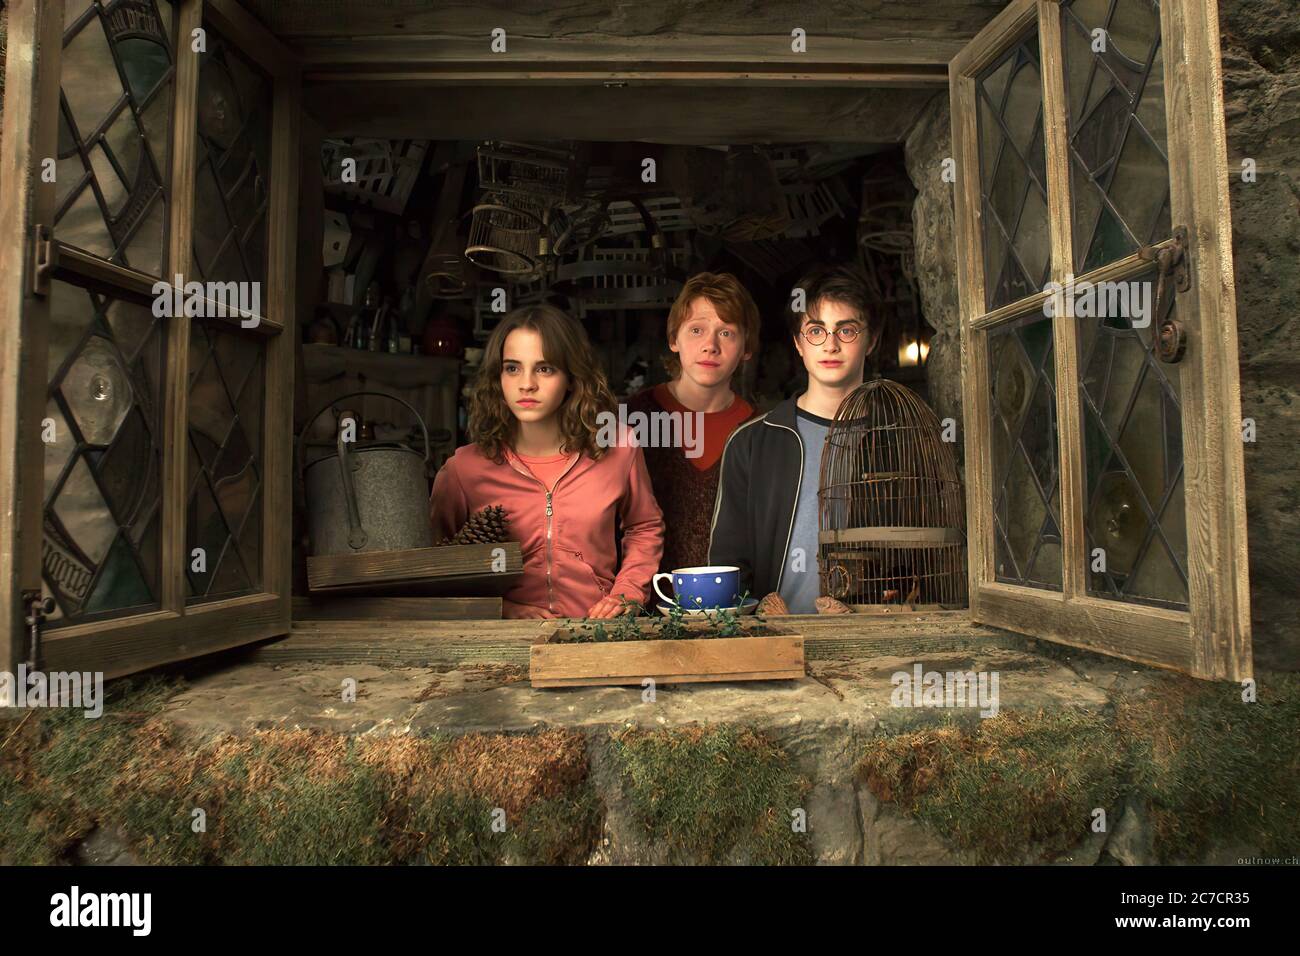 Emma Watson Daniel Radcliffe and Rupert Grint in Harry Potter and the Prisoner of Azkaban - Promotional Movie Picture Stock Photo